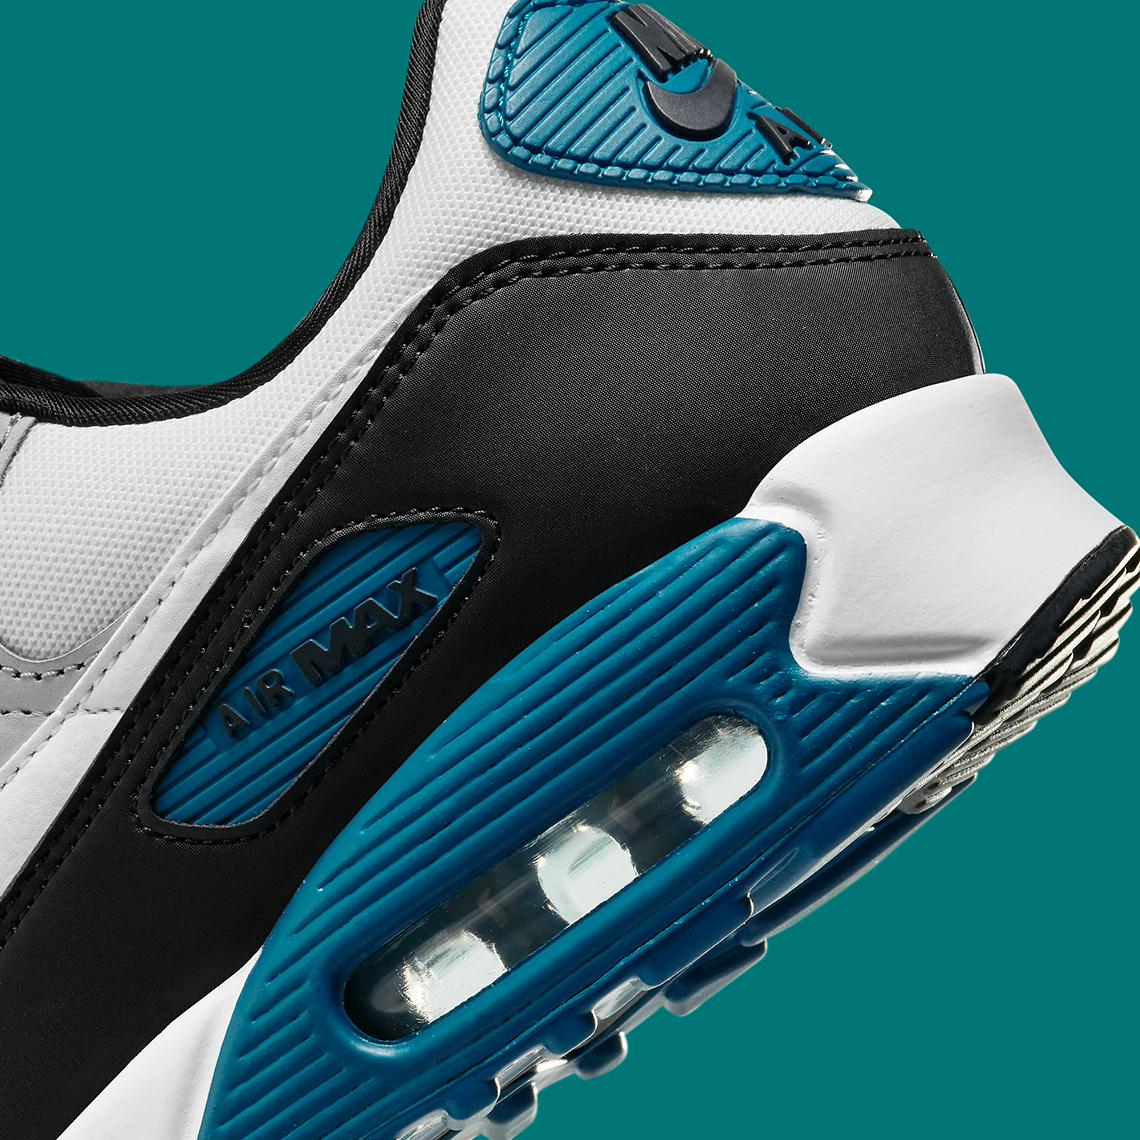 Nike Are Dropping Grand Slam-Inspired s White Black Teal Fb9658 002 2